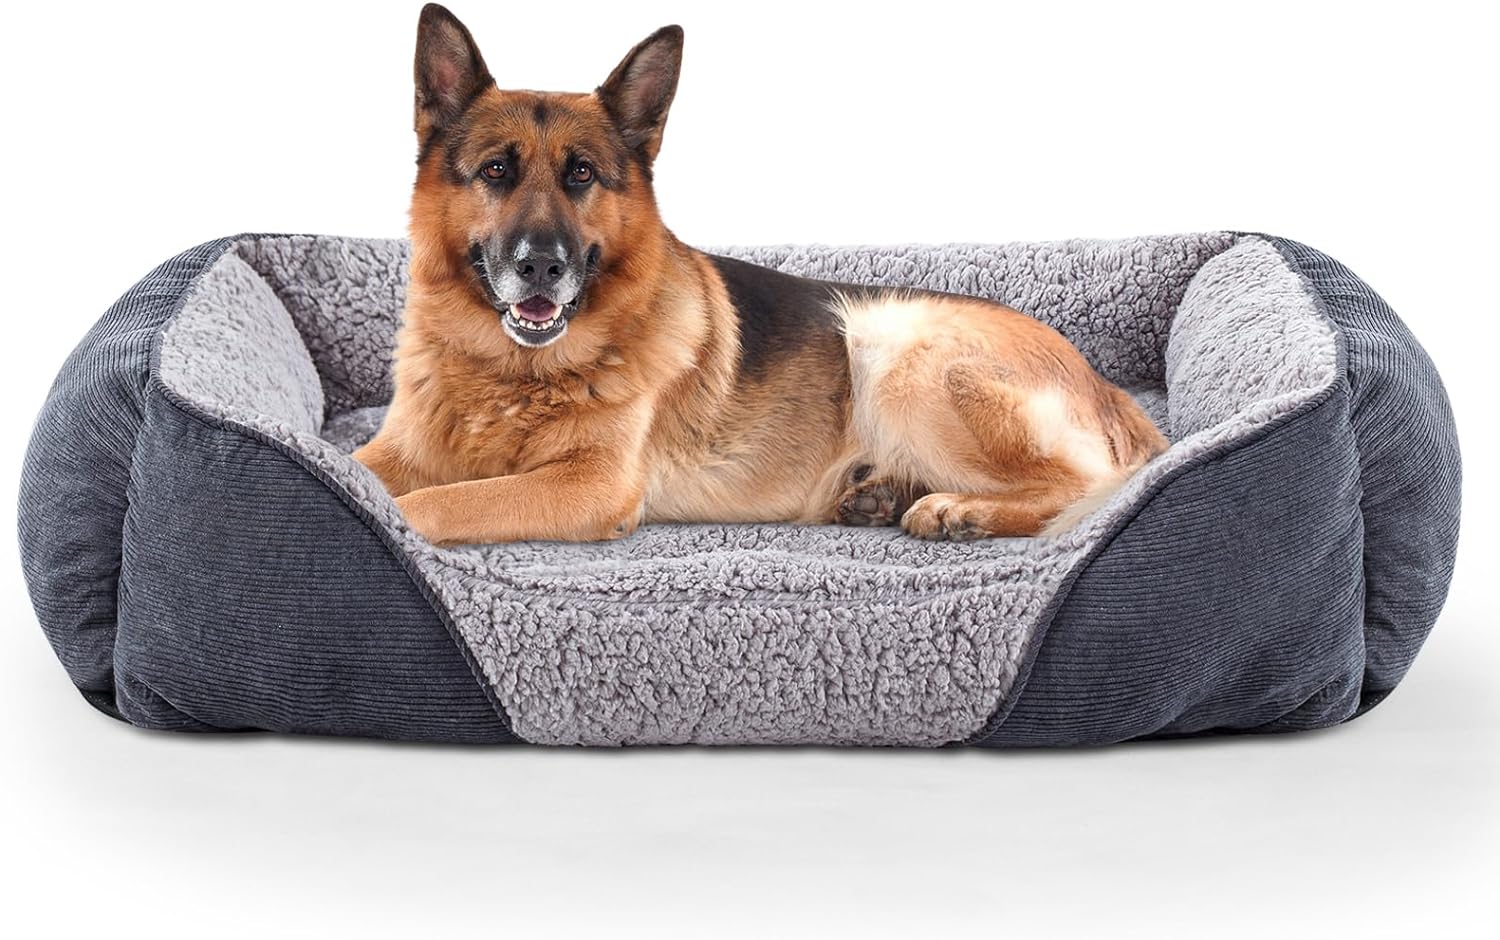 AIPERRO Dog Beds for Small Dogs, Cat Bed for Indoor Cat, Orthopedic Pet Beds for Puppy and Kitty, Extra Soft Machine Washable Dog Sofa with Anti-Slip Bottom, 20 * 19In